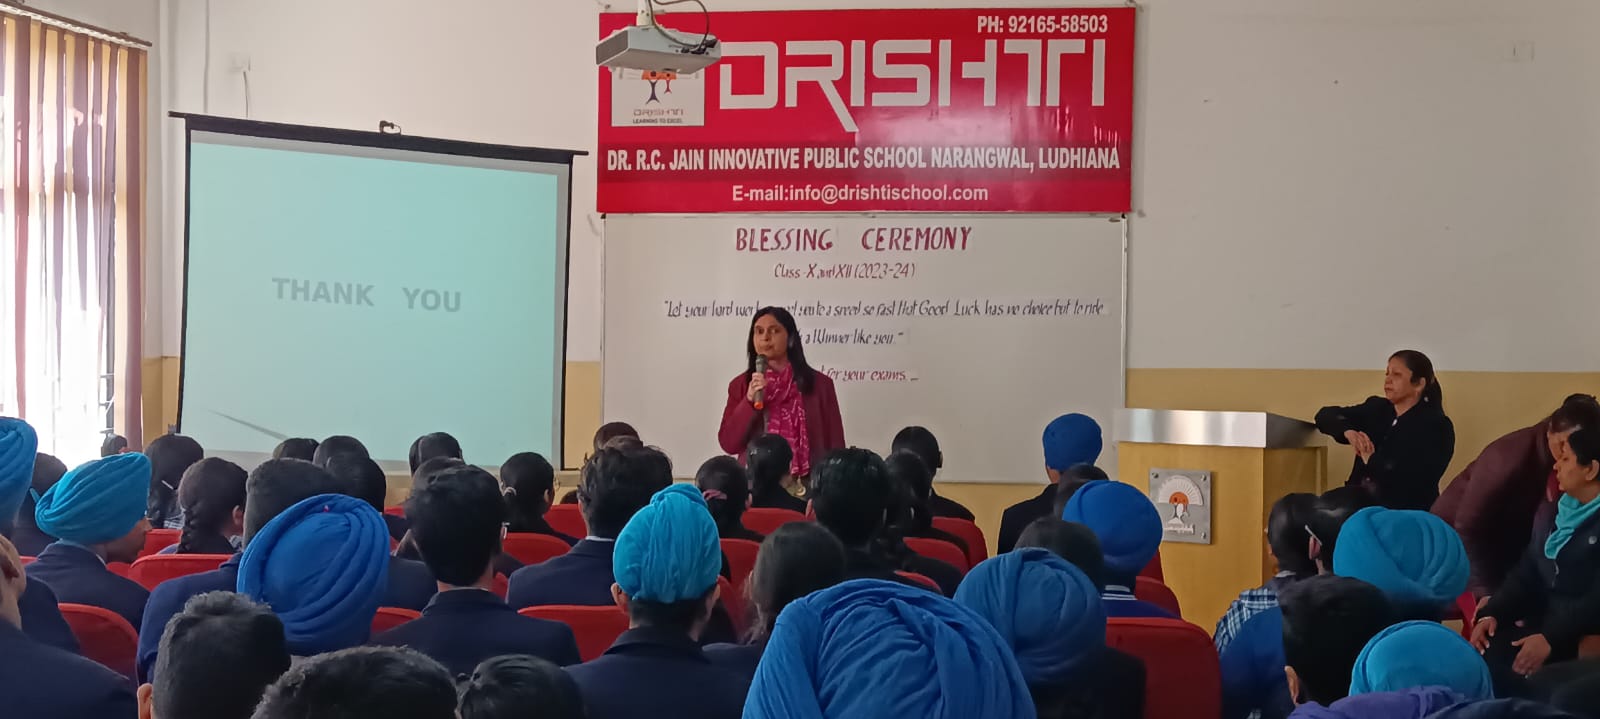 Drishti Hosts Blessing Ceremony for Grade X and XII Students Ahead of Board Examination